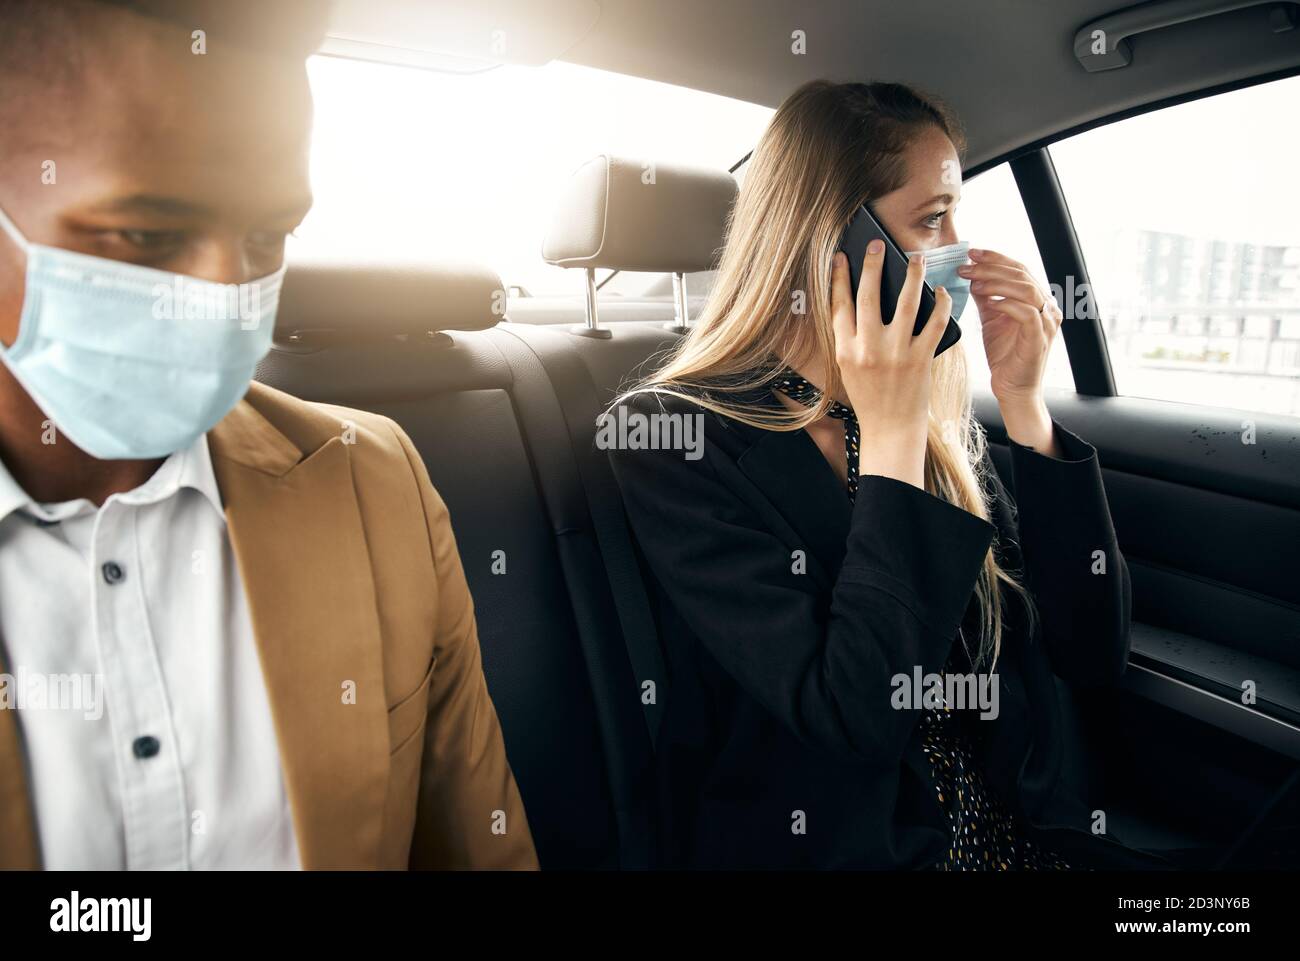 Business Couple Wearing Masks Using Laptop And Mobile Phone In Back Of Taxi During Health Pandemic Stock Photo